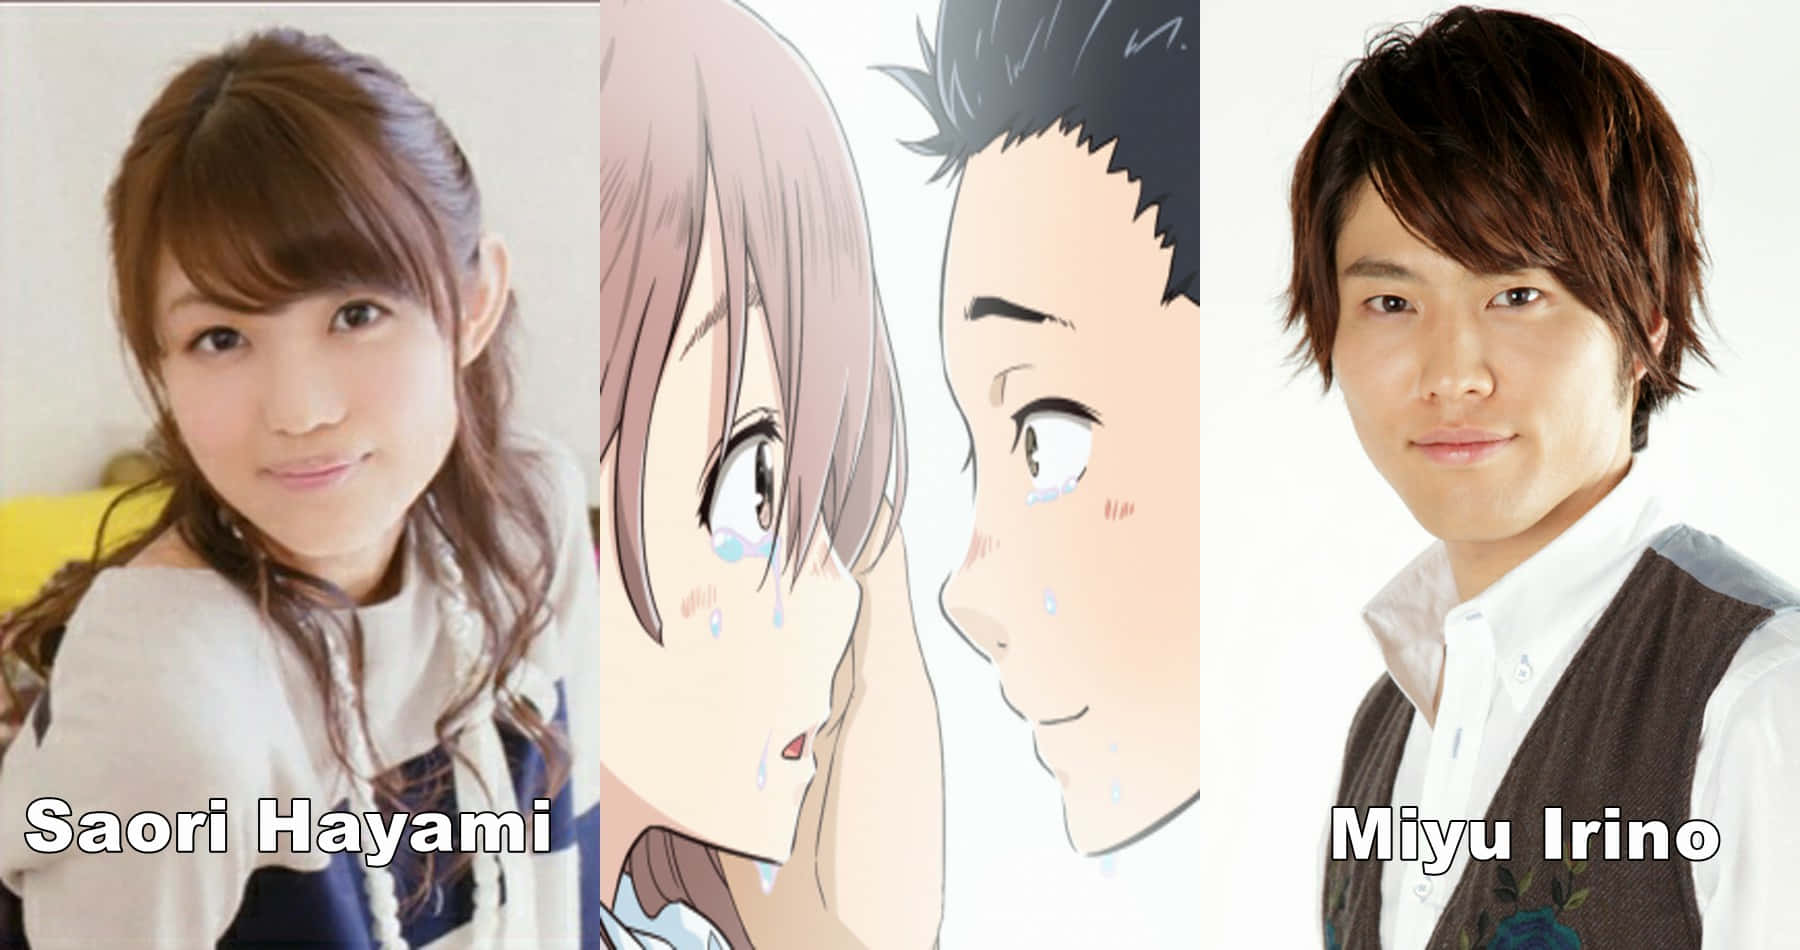 A Group Of Anime Characters With Their Faces